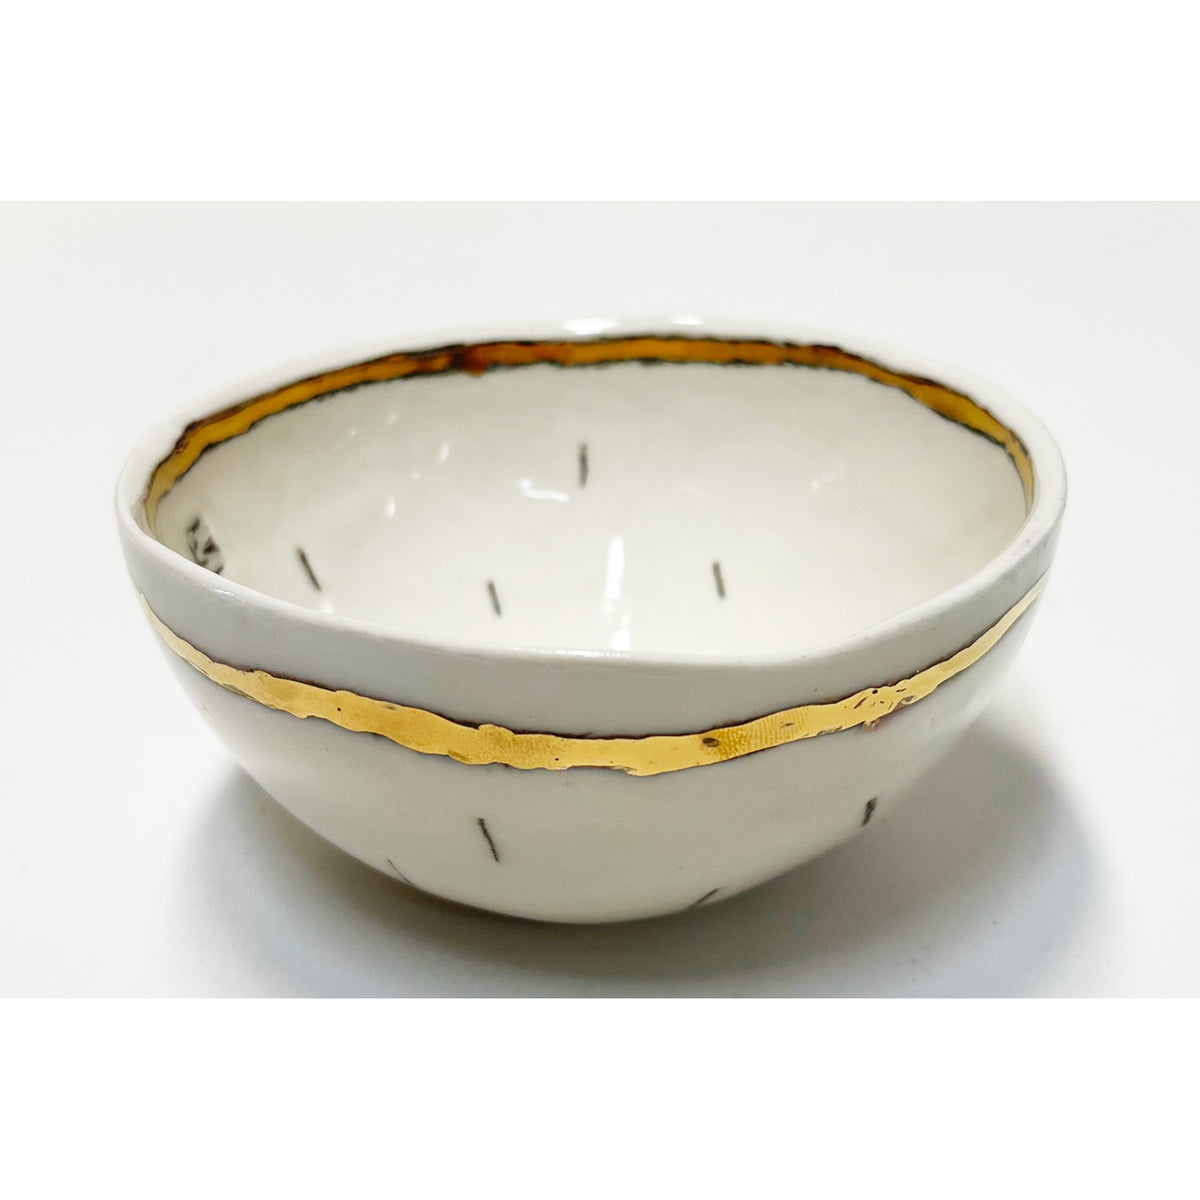 Marla Buck - Blessed Small Bowl, 4" x 4" x 2"